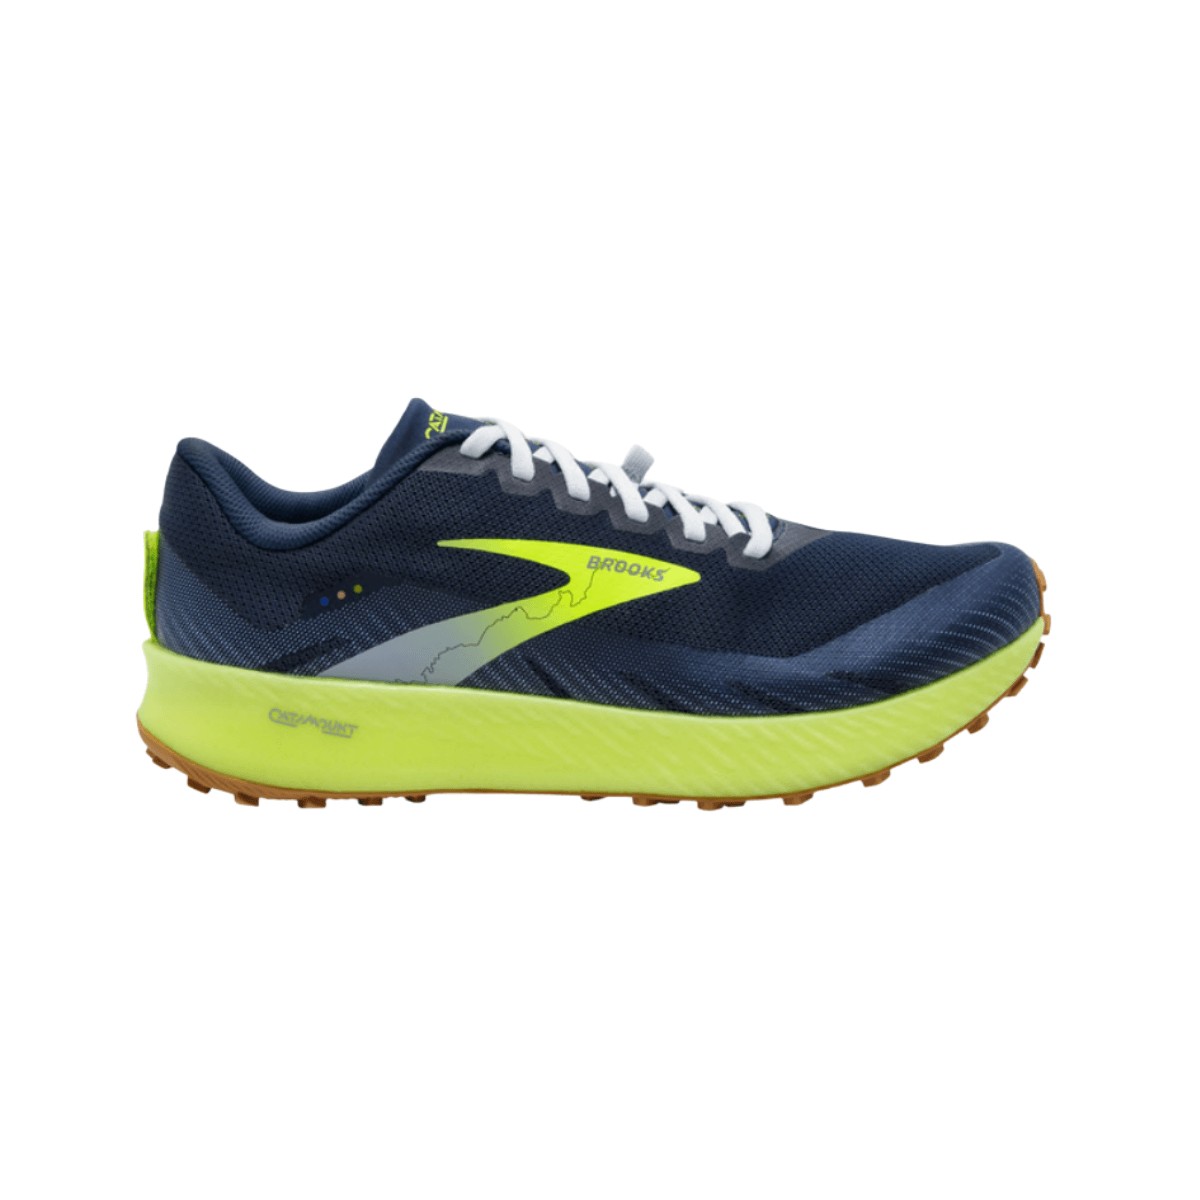 Brooks Catamount Shoes Blue Yellow SS22, Size 42,5 - EUR